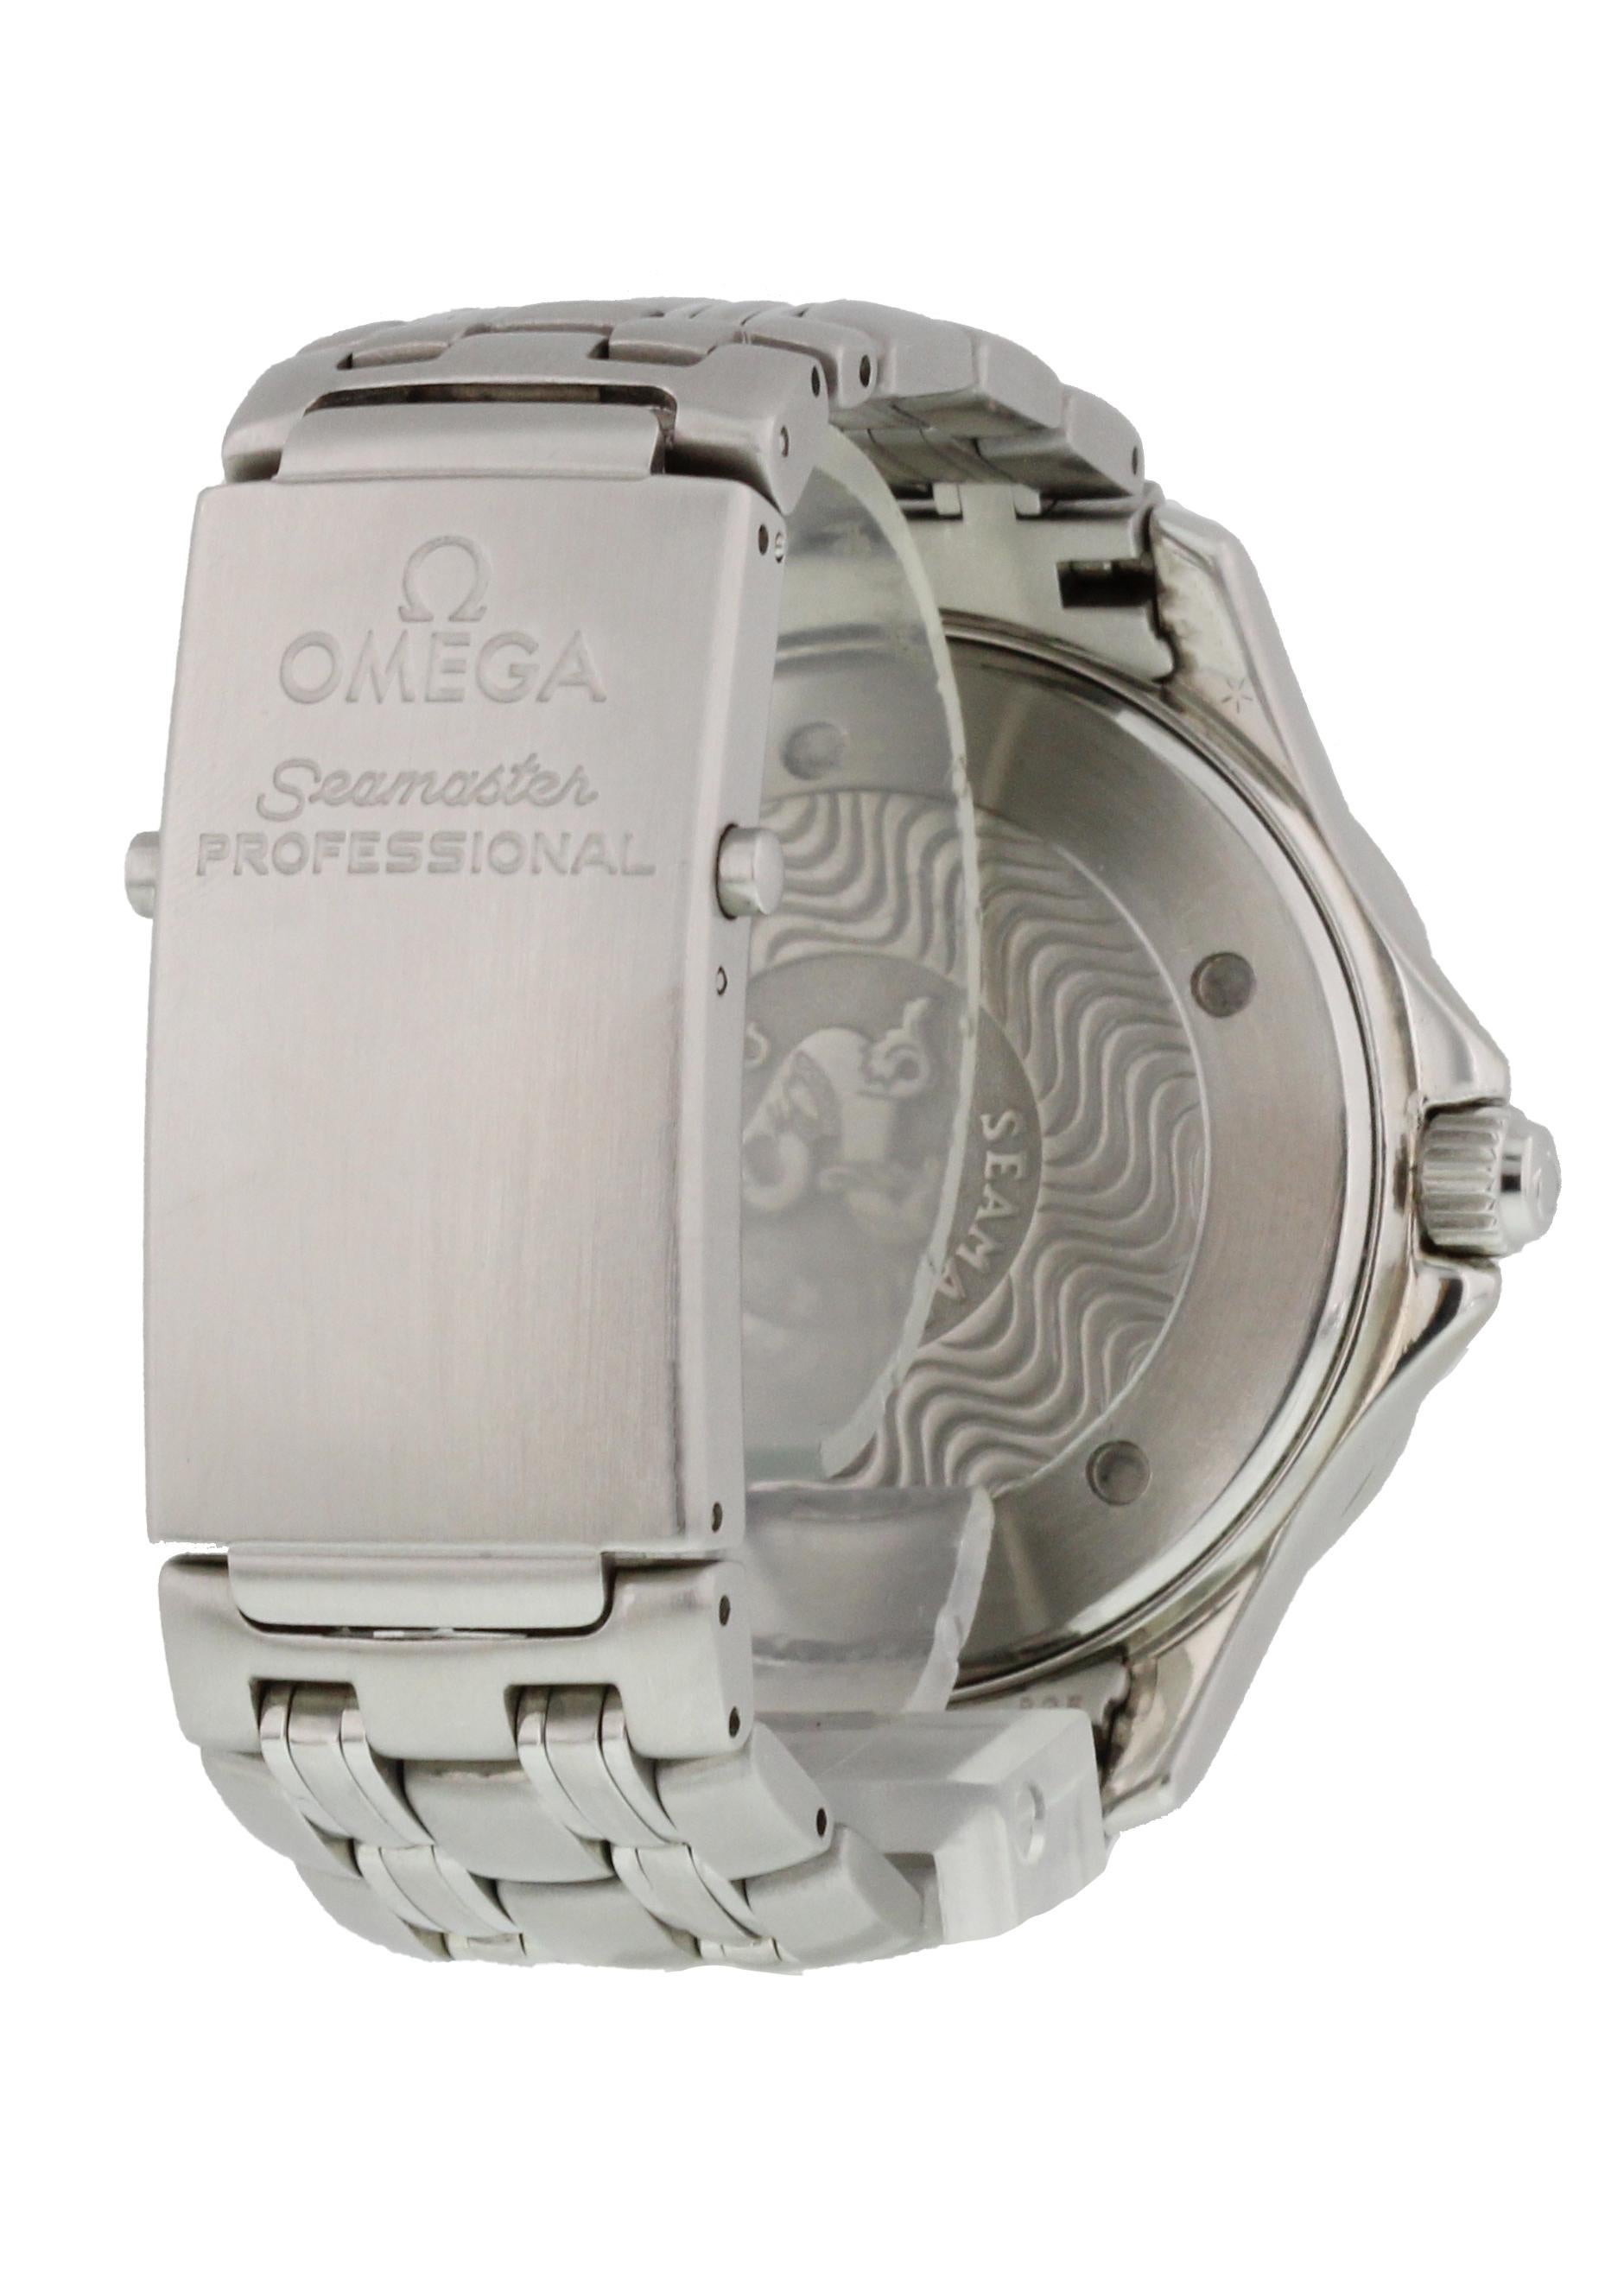 Omega Seamaster Professional 2531.80.00 Men's Watch For Sale 1